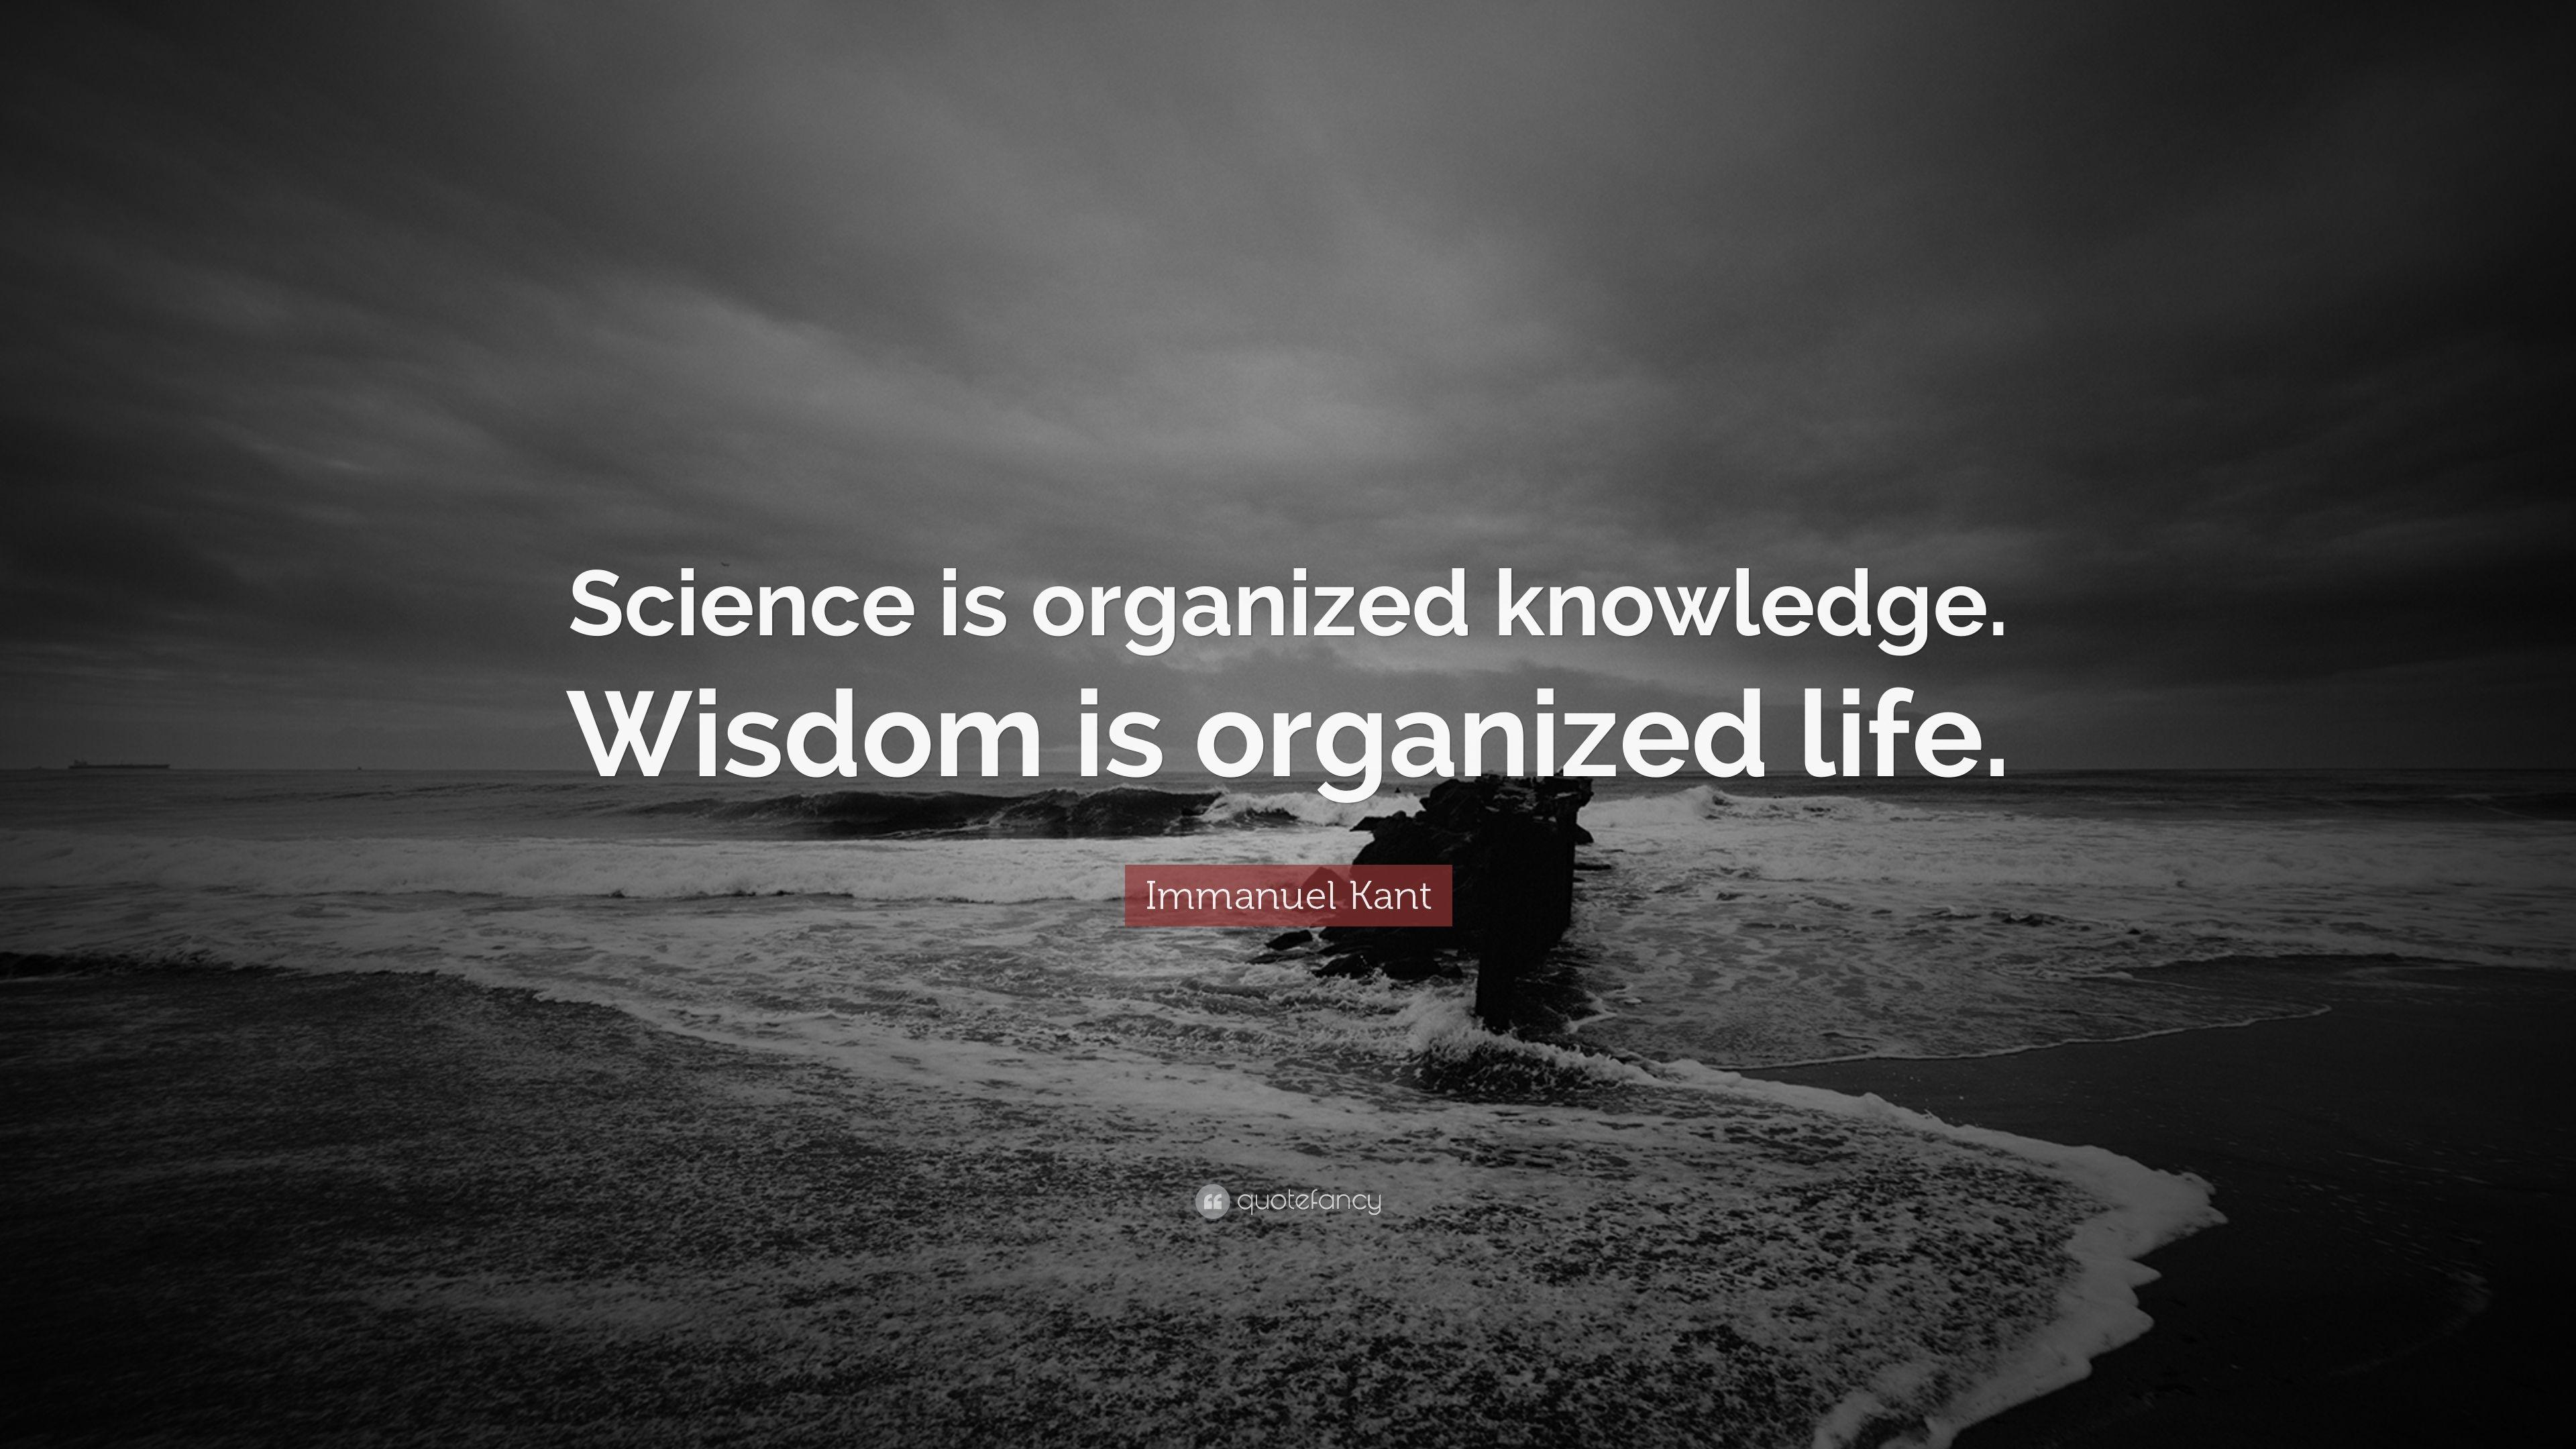 Immanuel Kant Quote: “Science is organized knowledge. Wisdom is